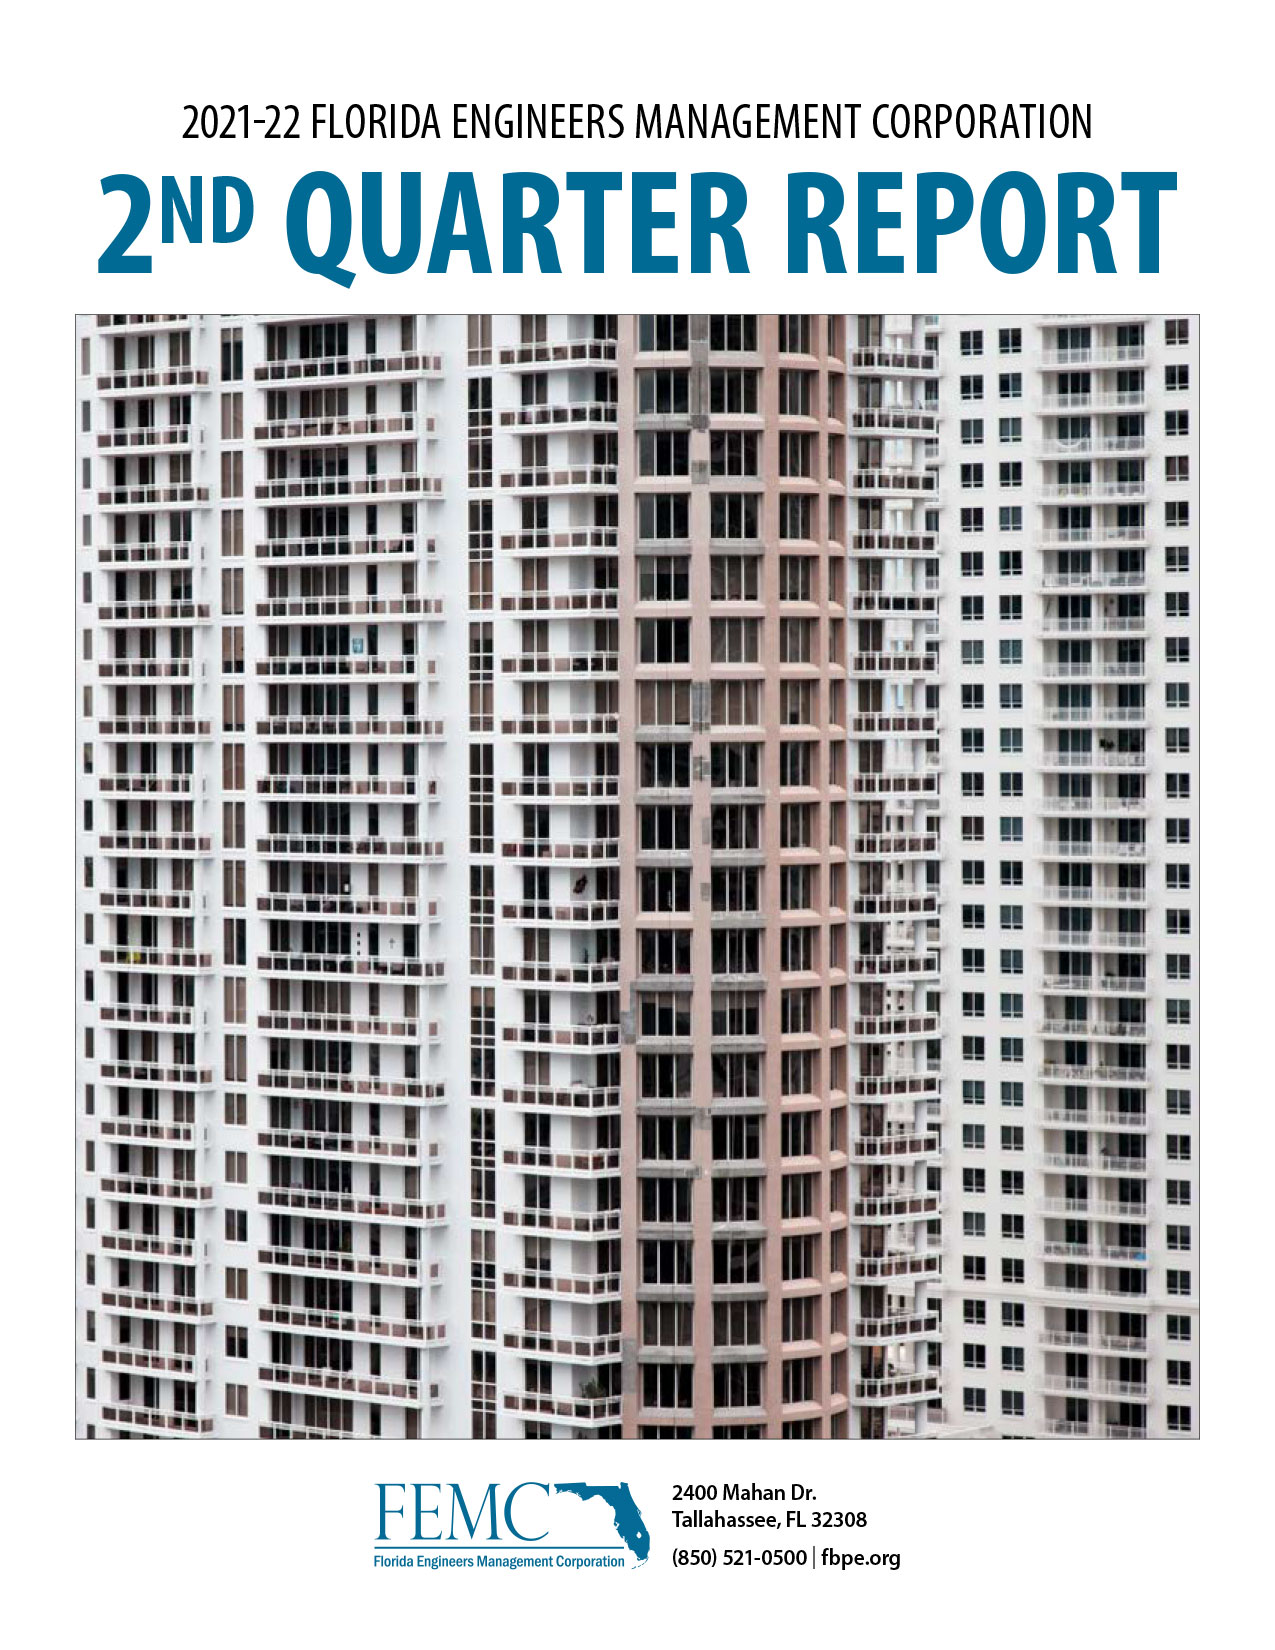 The cover of the 2021-22 Florida Engineers Management Corporation 2nd Quarter Report